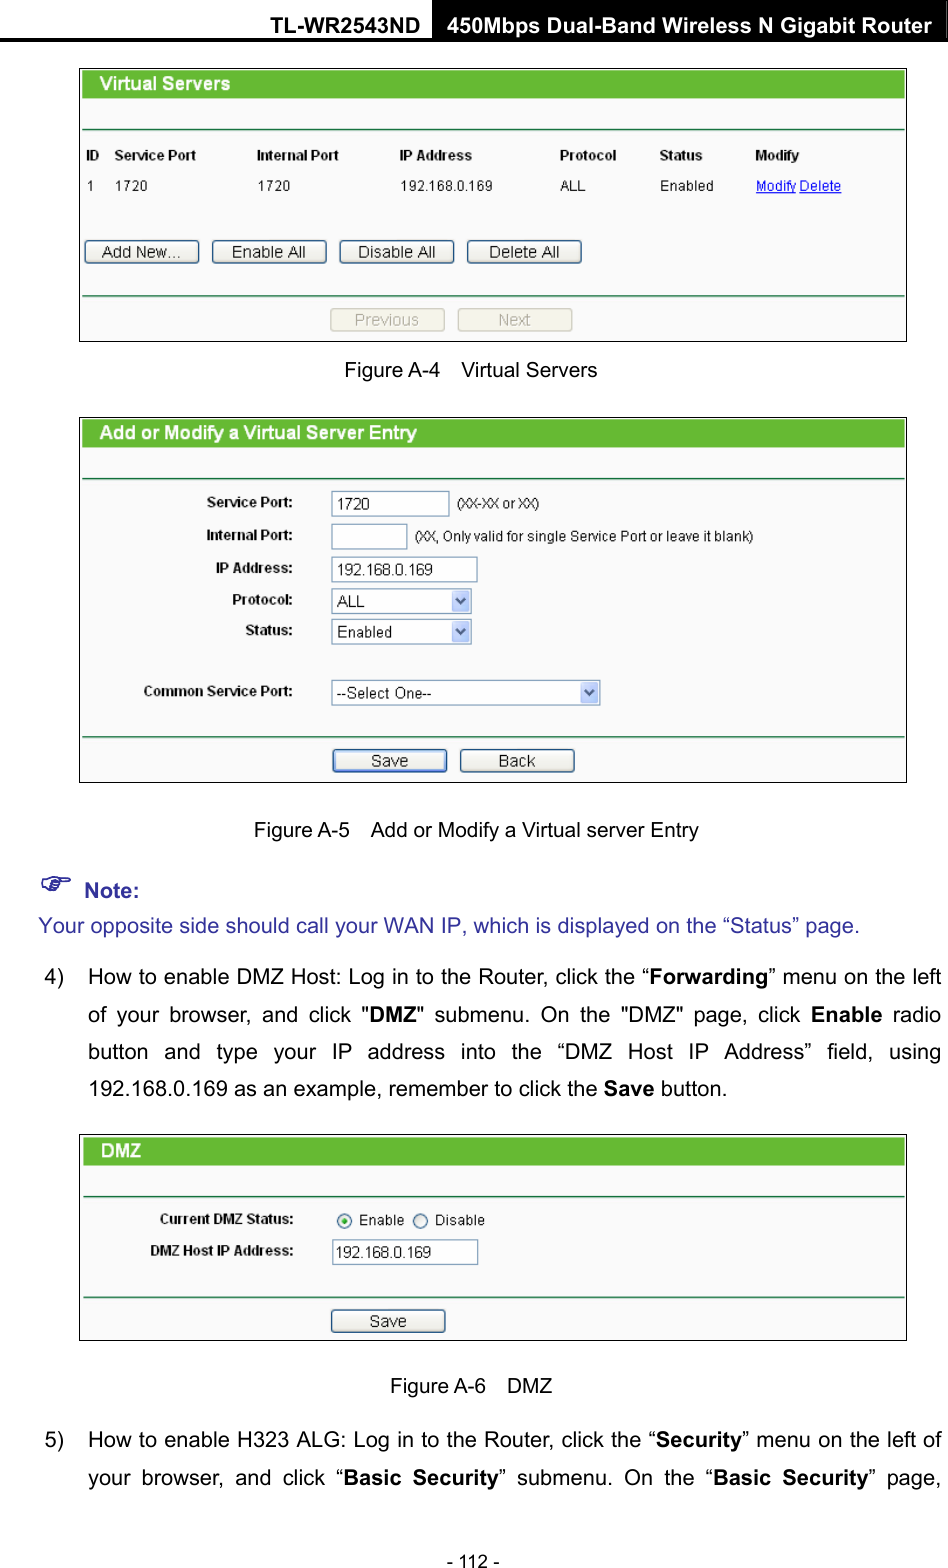 TL-WR2543ND 450Mbps Dual-Band Wireless N Gigabit Router - 112 -  Figure A-4  Virtual Servers   Figure A-5    Add or Modify a Virtual server Entry ) Note: Your opposite side should call your WAN IP, which is displayed on the “Status” page. 4)  How to enable DMZ Host: Log in to the Router, click the “Forwarding” menu on the left of your browser, and click &quot;DMZ&quot; submenu. On the &quot;DMZ&quot; page, click Enable radio button and type your IP address into the “DMZ Host IP Address” field, using 192.168.0.169 as an example, remember to click the Save button.    Figure A-6  DMZ 5)  How to enable H323 ALG: Log in to the Router, click the “Security” menu on the left of your browser, and click “Basic Security” submenu. On the “Basic Security” page, 